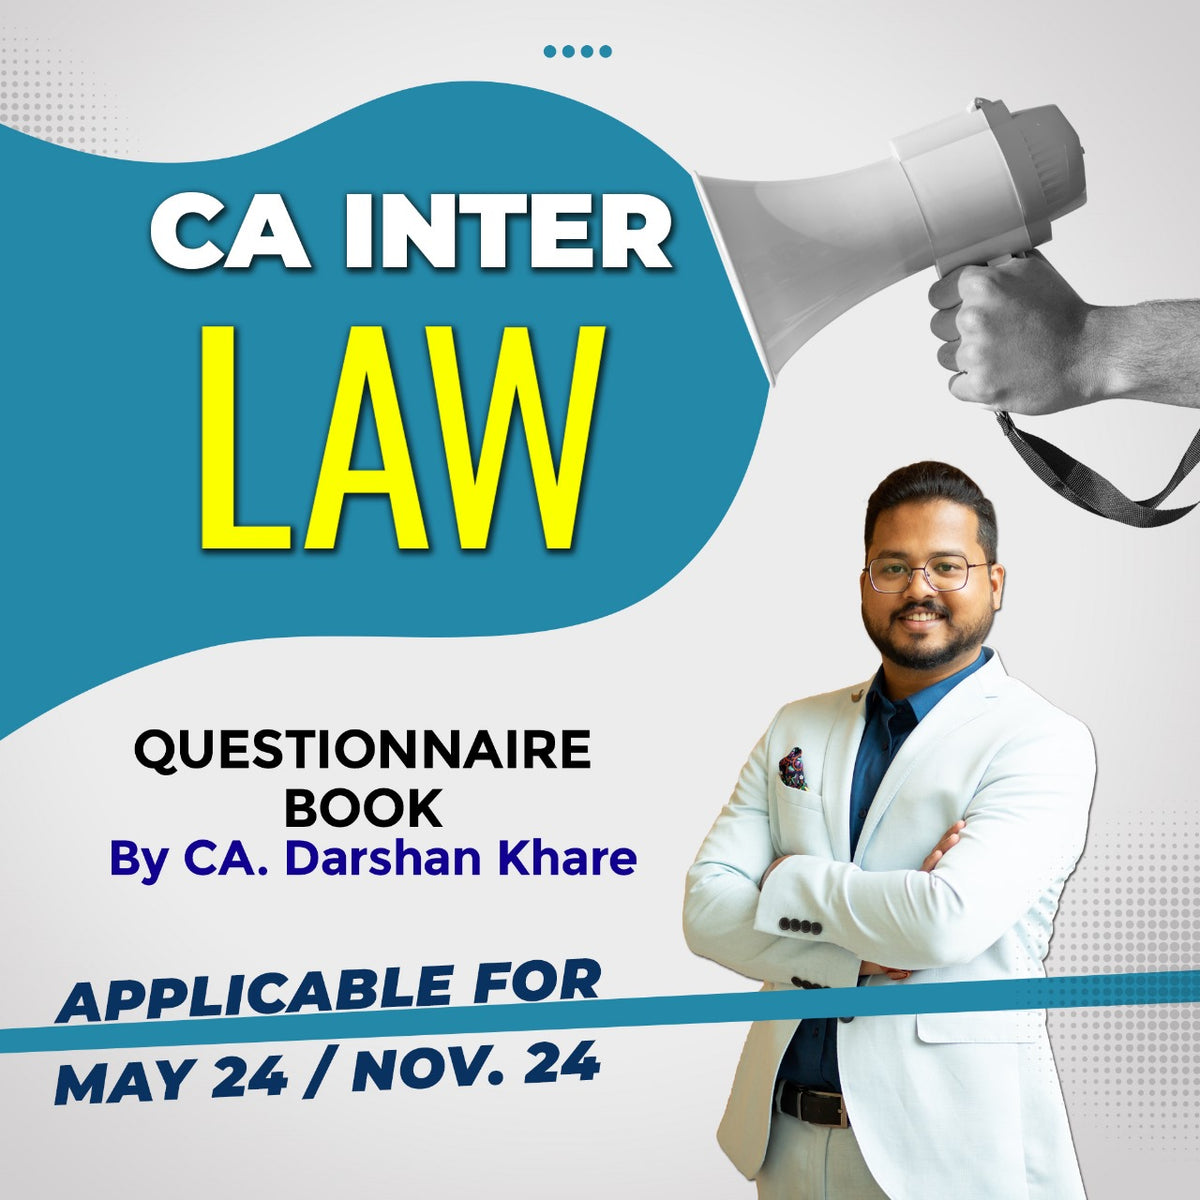 CA INTER LAW QUESTIONNAIRE BOOK BY CA DARSHAN KHARE